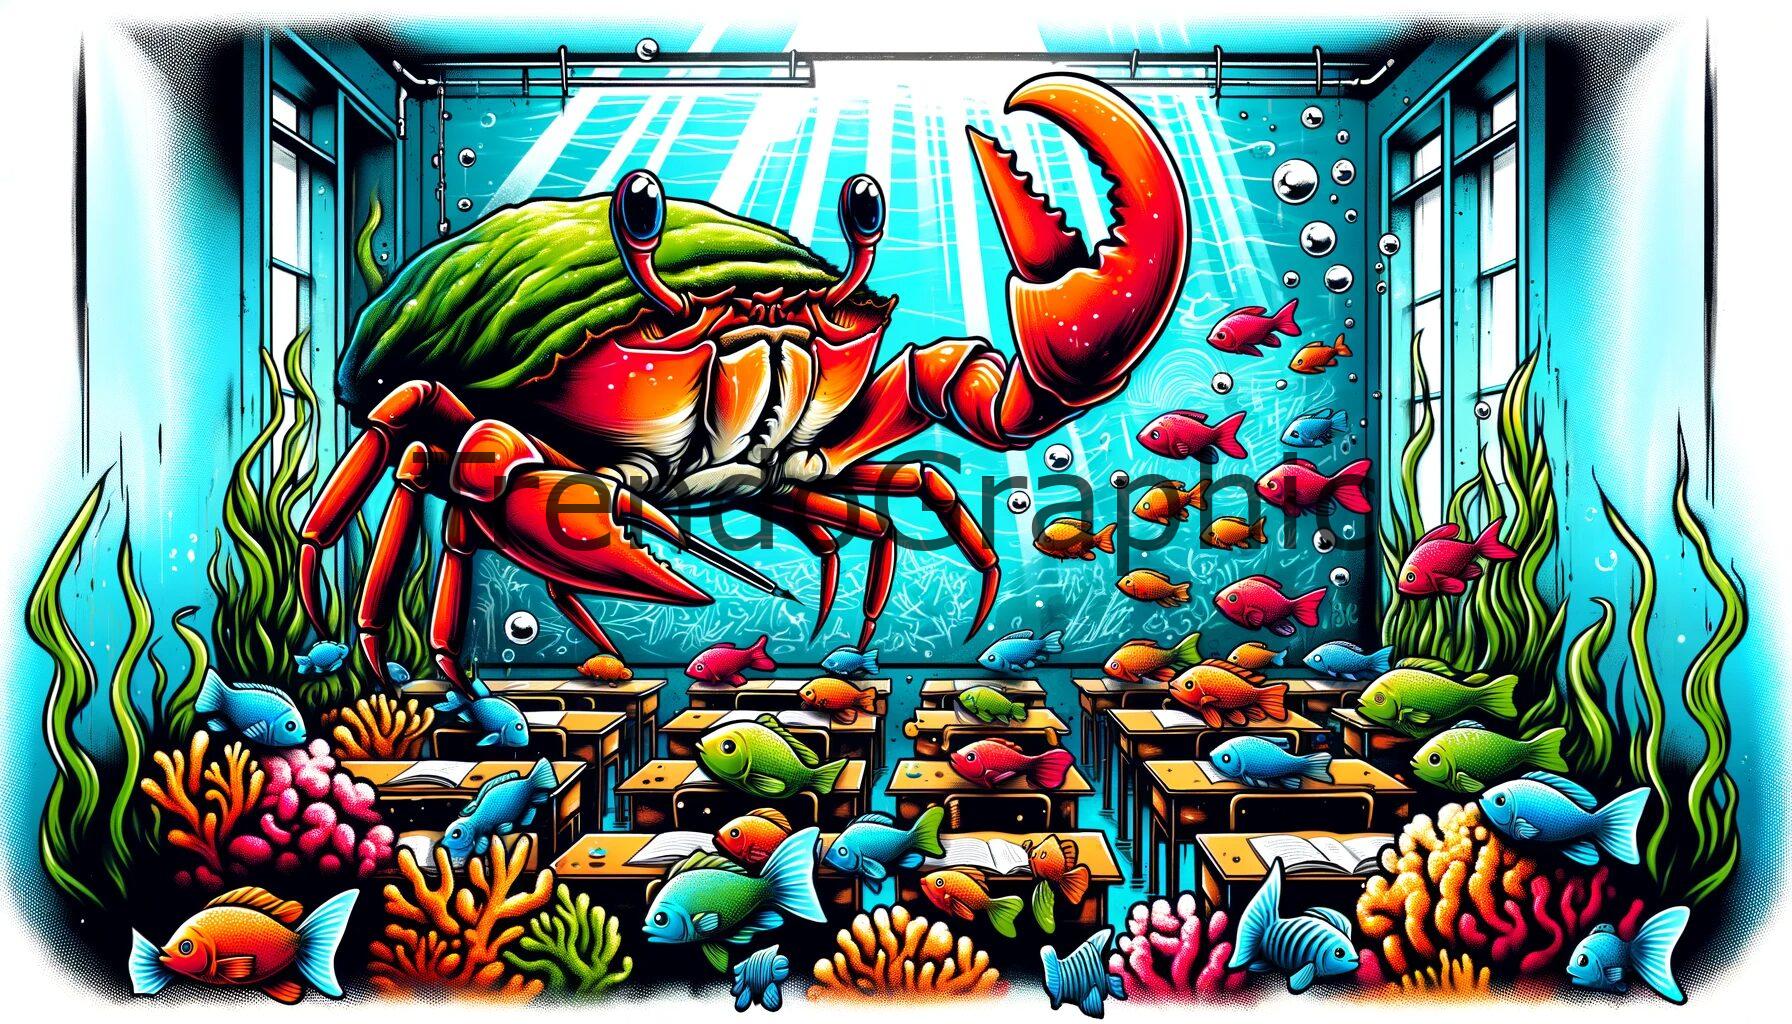 Underwater Learning: The Crab’s Classroom